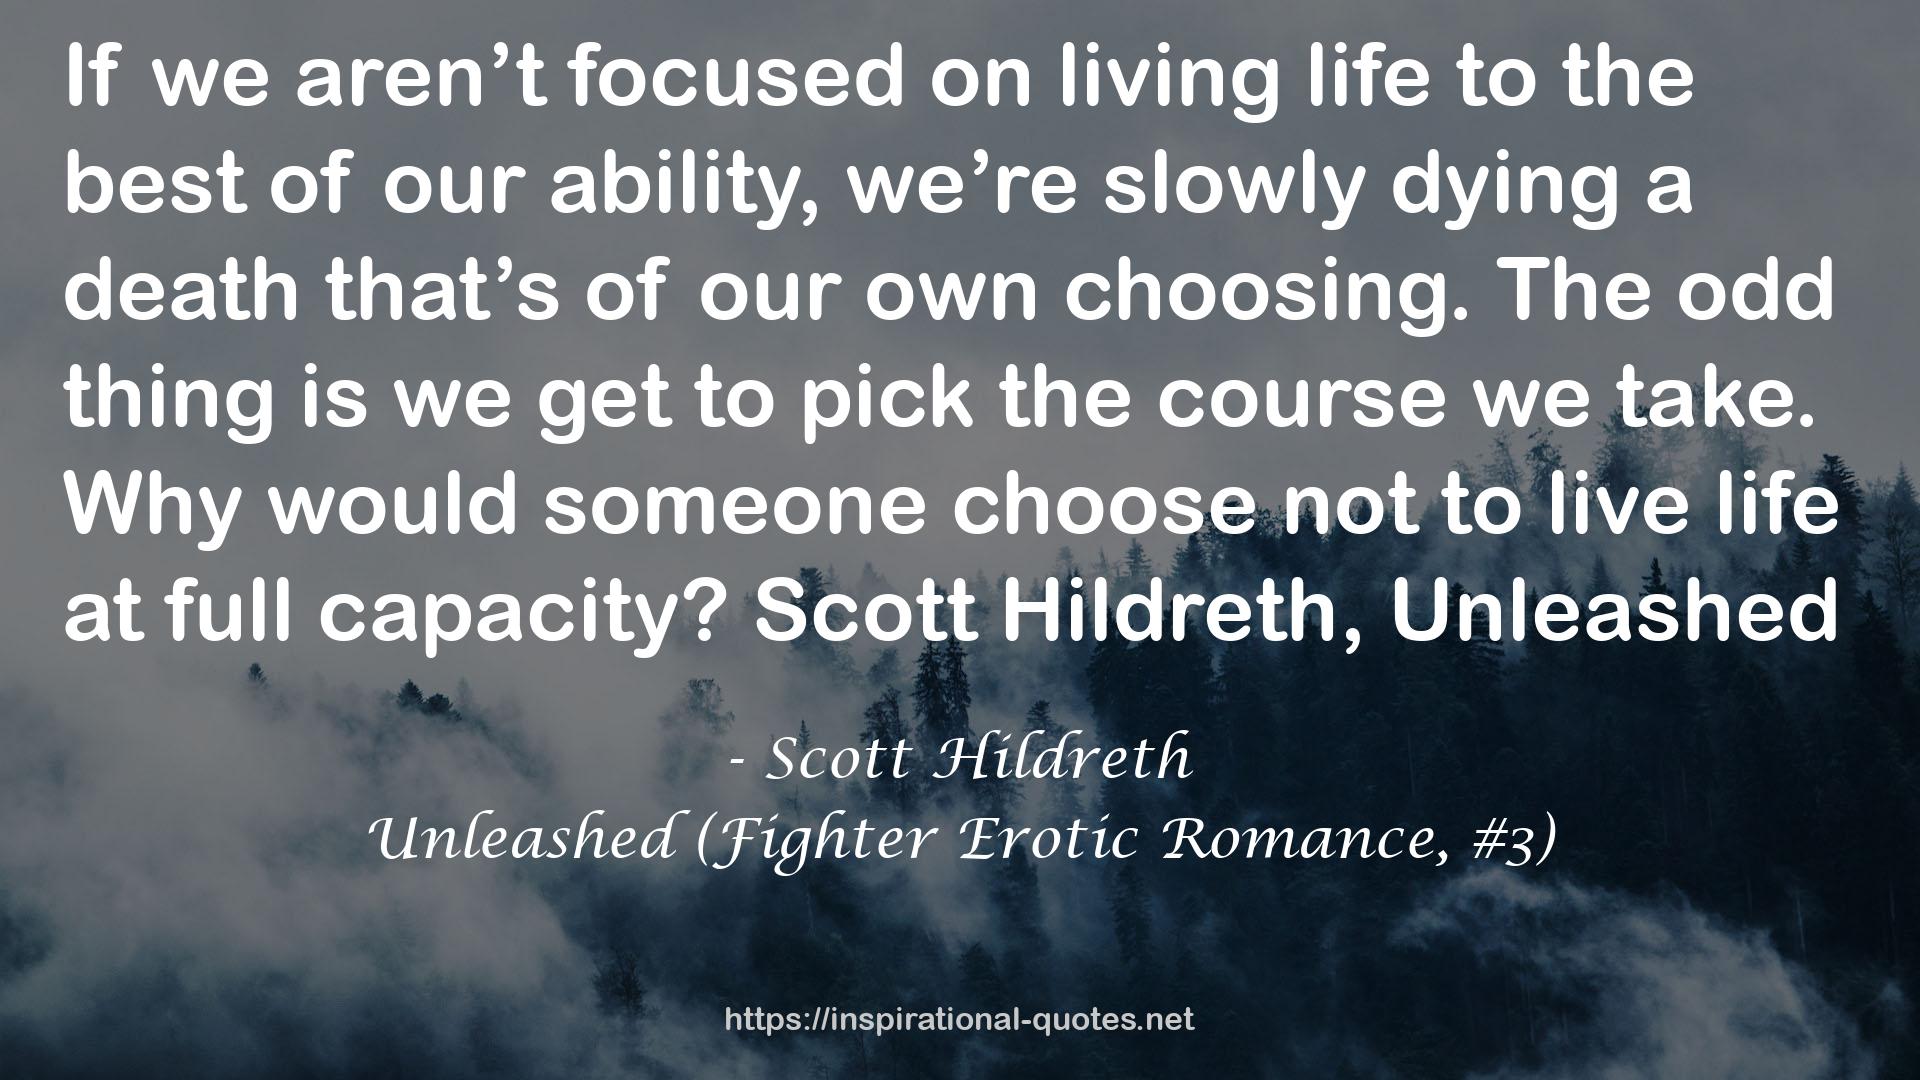 Unleashed (Fighter Erotic Romance, #3) QUOTES